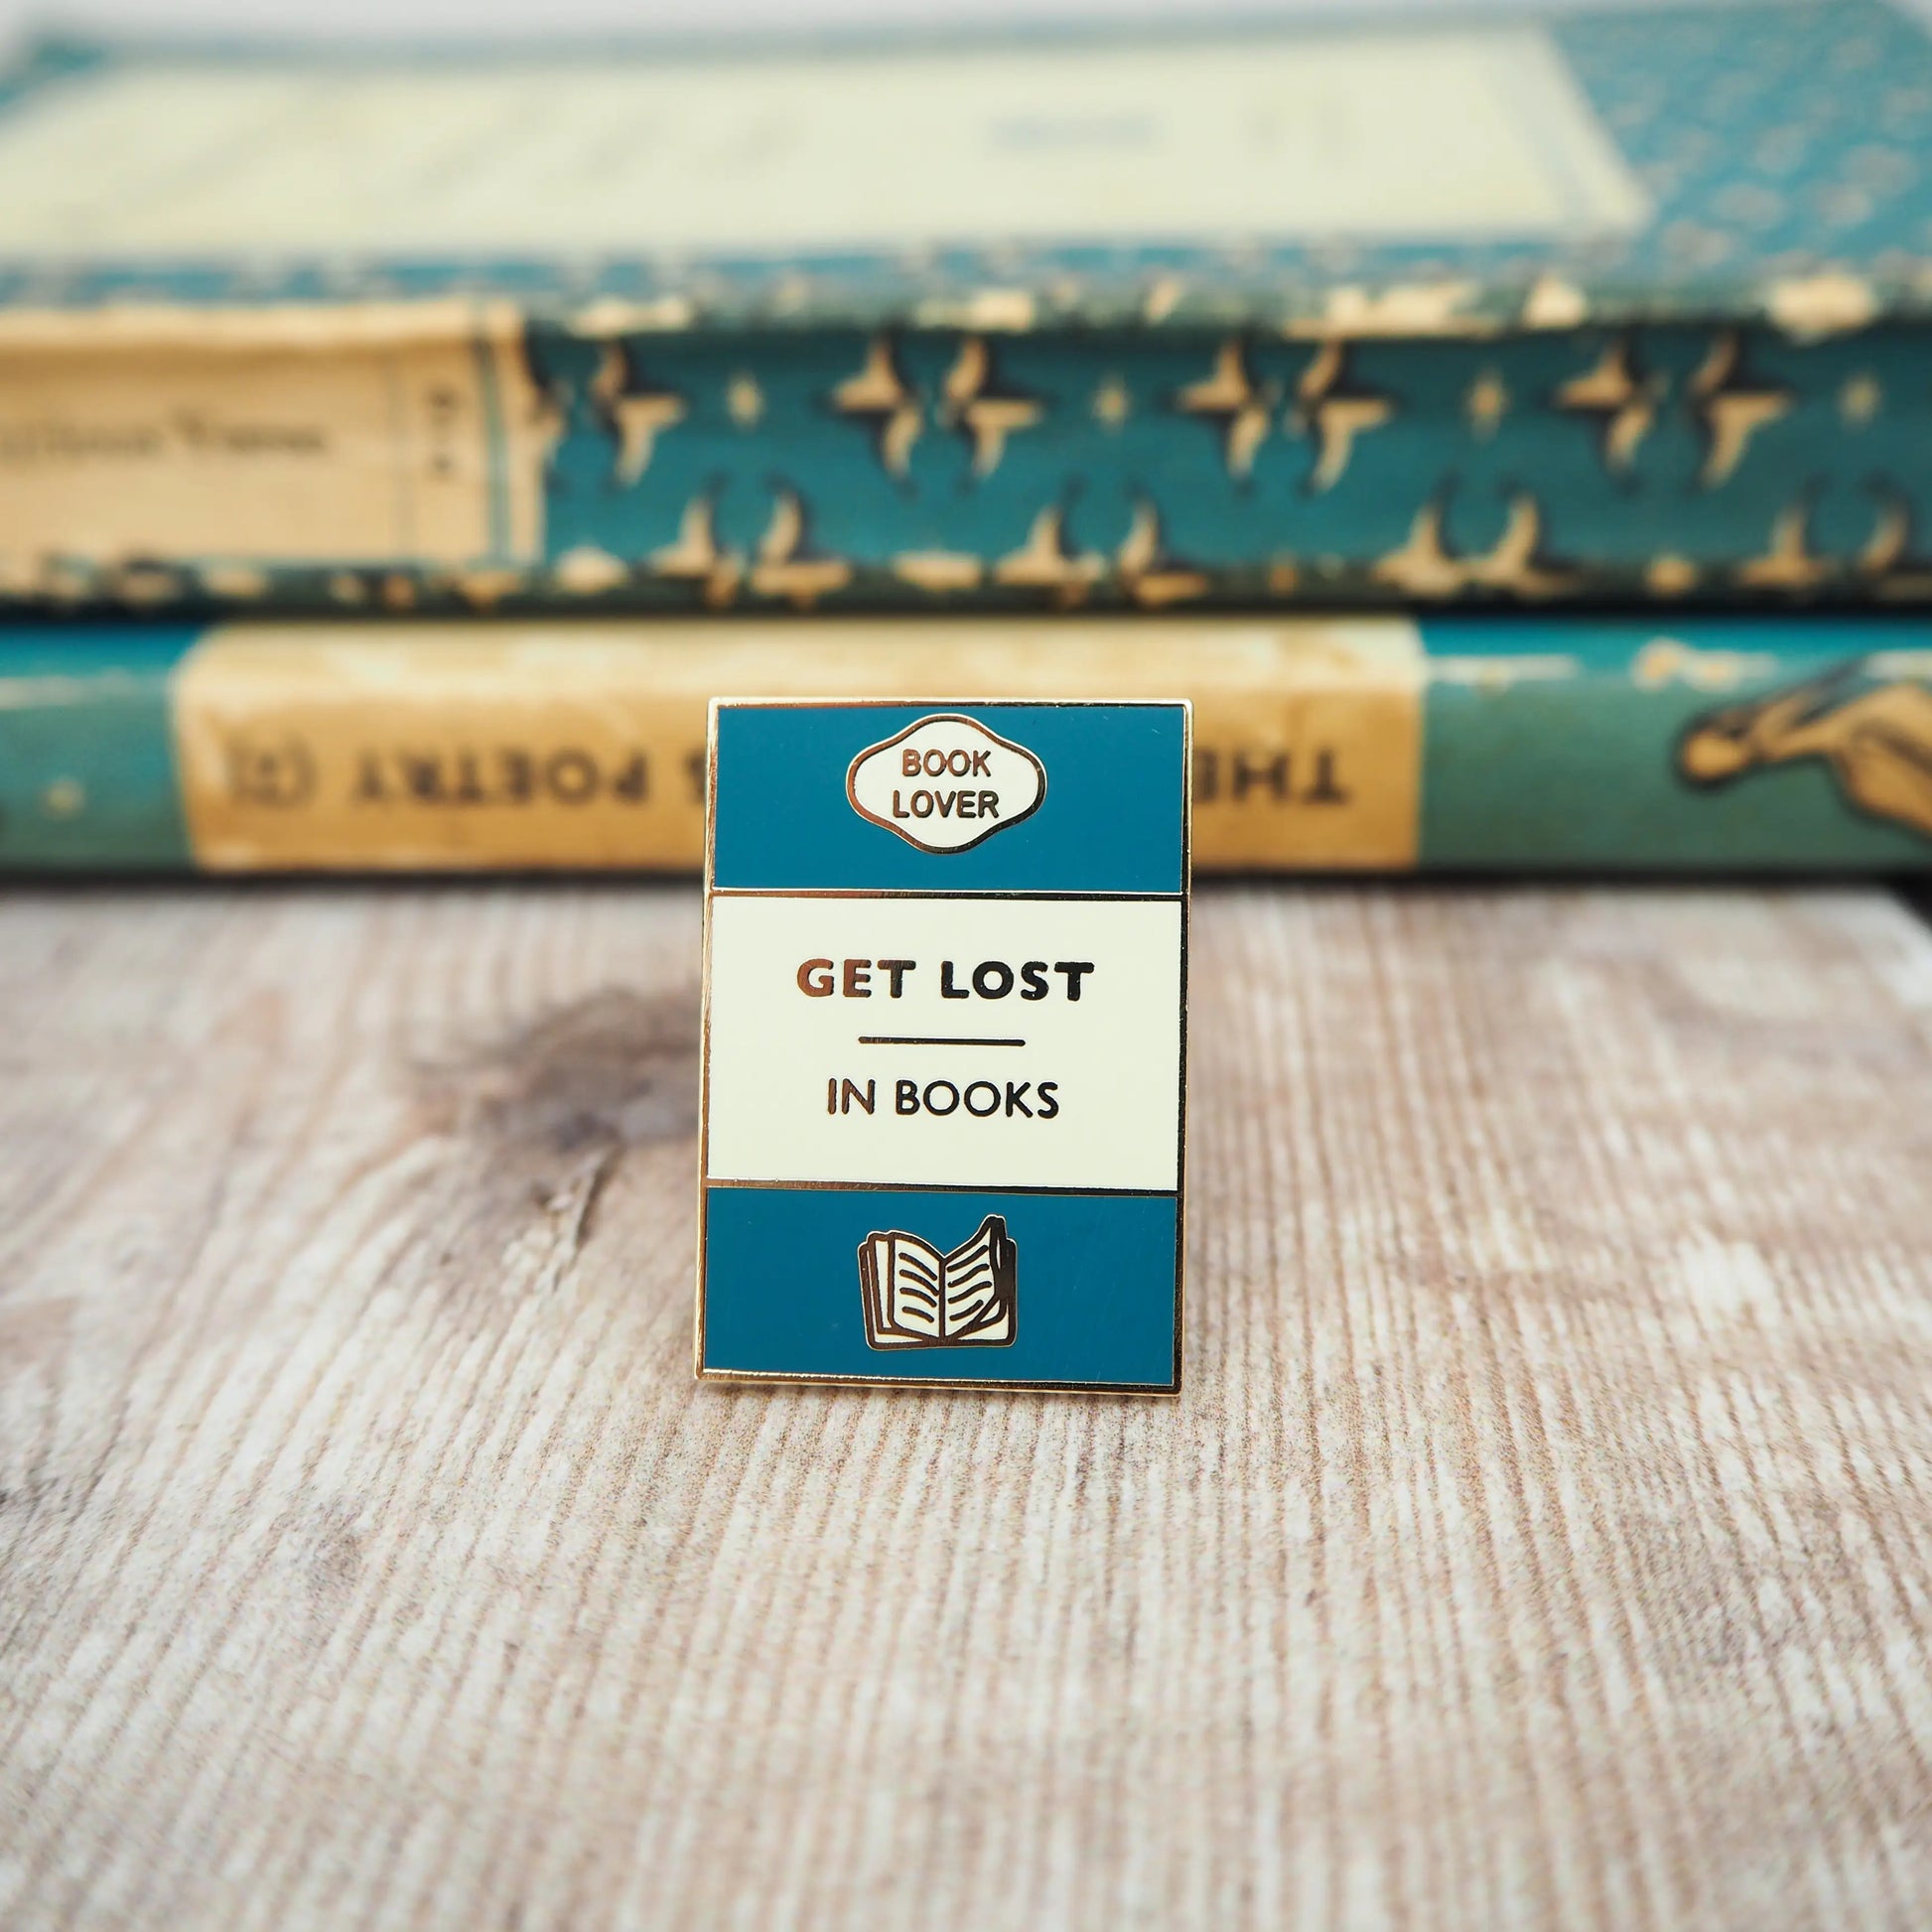 'Get Lost in Books' Book Lover Enamel Pin Badge from Literary Emporium.